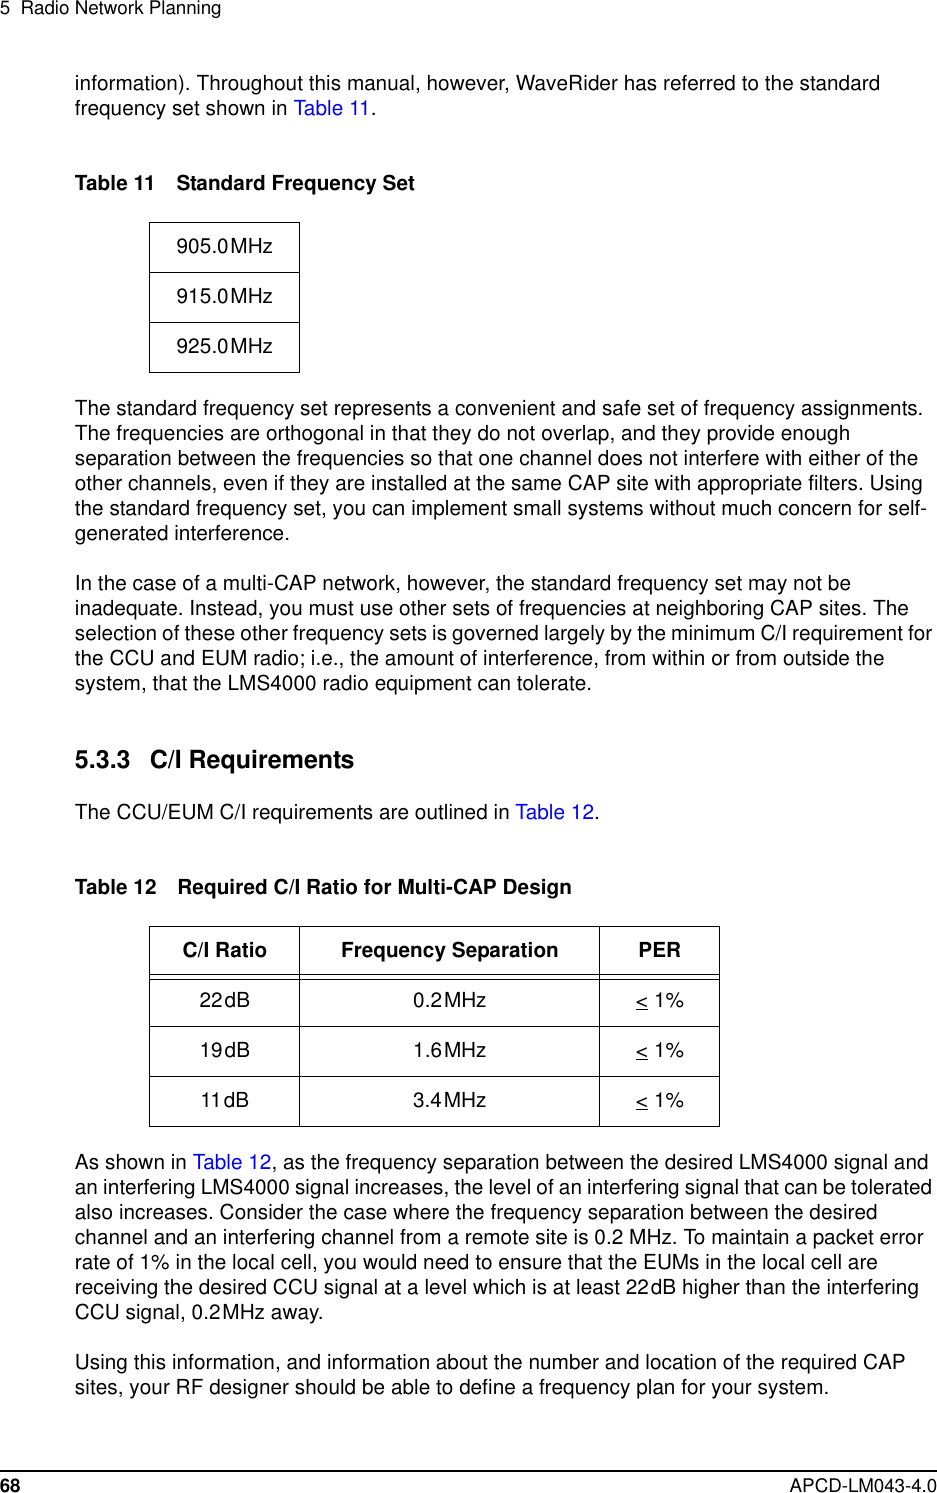 5 Radio Network Planning68 APCD-LM043-4.0information). Throughout this manual, however, WaveRider has referred to the standardfrequency set shown in Table 11.Table 11 Standard Frequency SetThe standard frequency set represents a convenient and safe set of frequency assignments.The frequencies are orthogonal in that they do not overlap, and they provide enoughseparation between the frequencies so that one channel does not interfere with either of theother channels, even if they are installed at the same CAP site with appropriate filters. Usingthe standard frequency set, you can implement small systems without much concern for self-generated interference.In the case of a multi-CAP network, however, the standard frequency set may not beinadequate. Instead, you must use other sets of frequencies at neighboring CAP sites. Theselection of these other frequency sets is governed largely by the minimum C/I requirement forthe CCU and EUM radio; i.e., the amount of interference, from within or from outside thesystem, that the LMS4000 radio equipment can tolerate.5.3.3 C/I RequirementsThe CCU/EUM C/I requirements are outlined in Table 12.Table 12 Required C/I Ratio for Multi-CAP DesignAs shown in Table 12, as the frequency separation between the desired LMS4000 signal andan interfering LMS4000 signal increases, the level of an interfering signal that can be toleratedalso increases. Consider the case where the frequency separation between the desiredchannel and an interfering channel from a remote site is 0.2 MHz. To maintain a packet errorrate of 1% in the local cell, you would need to ensure that the EUMs in the local cell arereceiving the desired CCU signal at a level which is at least 22dB higher than the interferingCCU signal, 0.2MHz away.Using this information, and information about the number and location of the required CAPsites, your RF designer should be able to define a frequency plan for your system.905.0MHz915.0MHz925.0MHzC/I Ratio Frequency Separation PER22dB 0.2MHz &lt; 1%19dB 1.6MHz &lt; 1%11dB 3.4MHz &lt; 1%